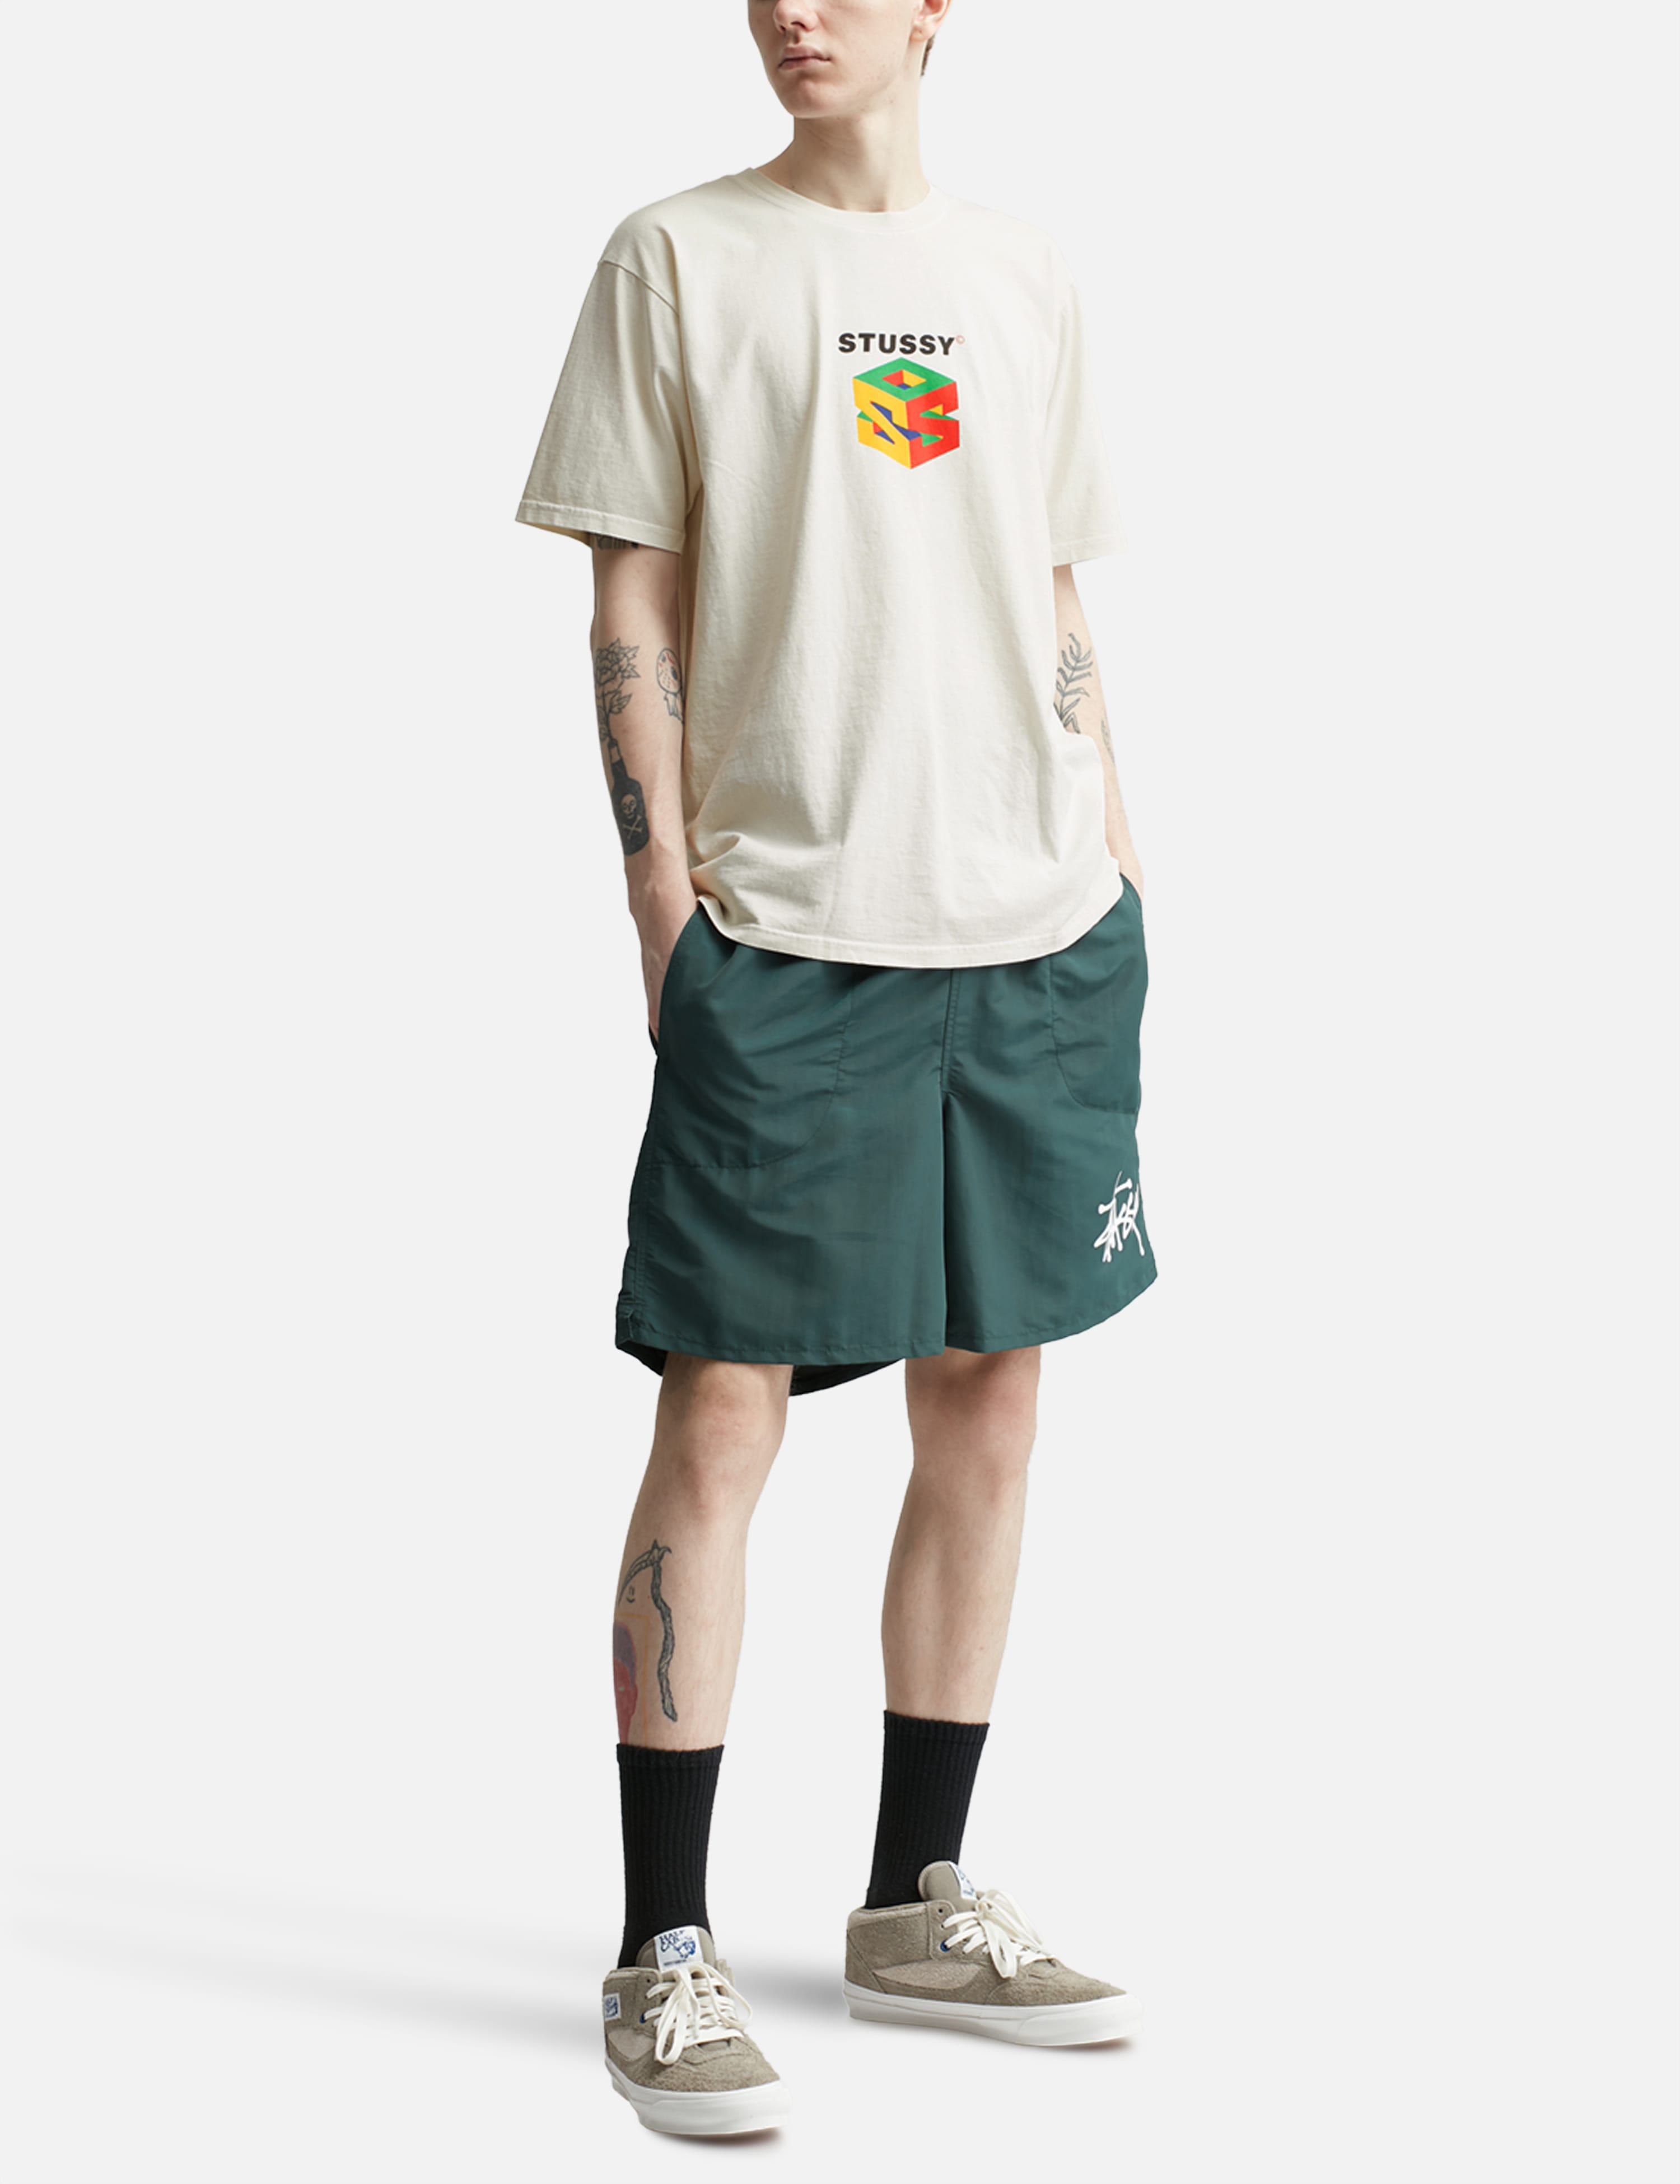 S64 PIGMENT DYED TEE